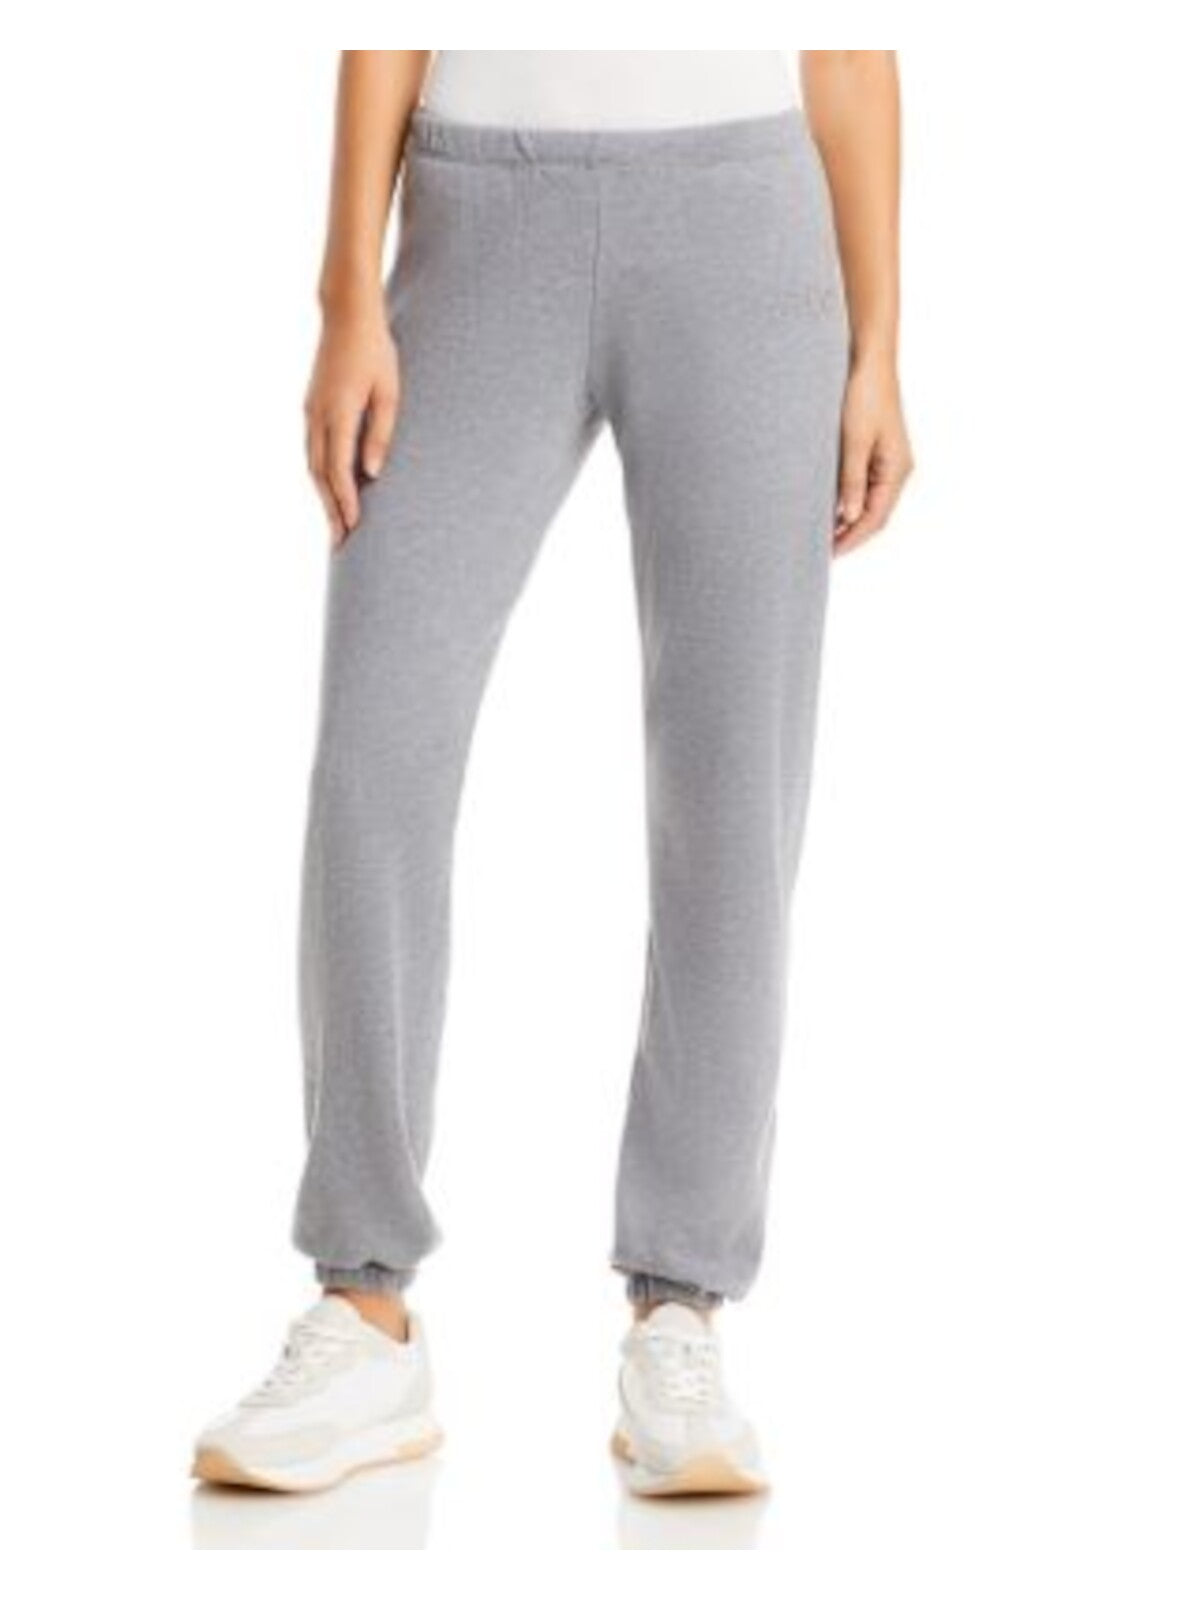 WSLY Womens Gray Ribbed Drawstring Waist Jogger Heather Active Wear Pants L